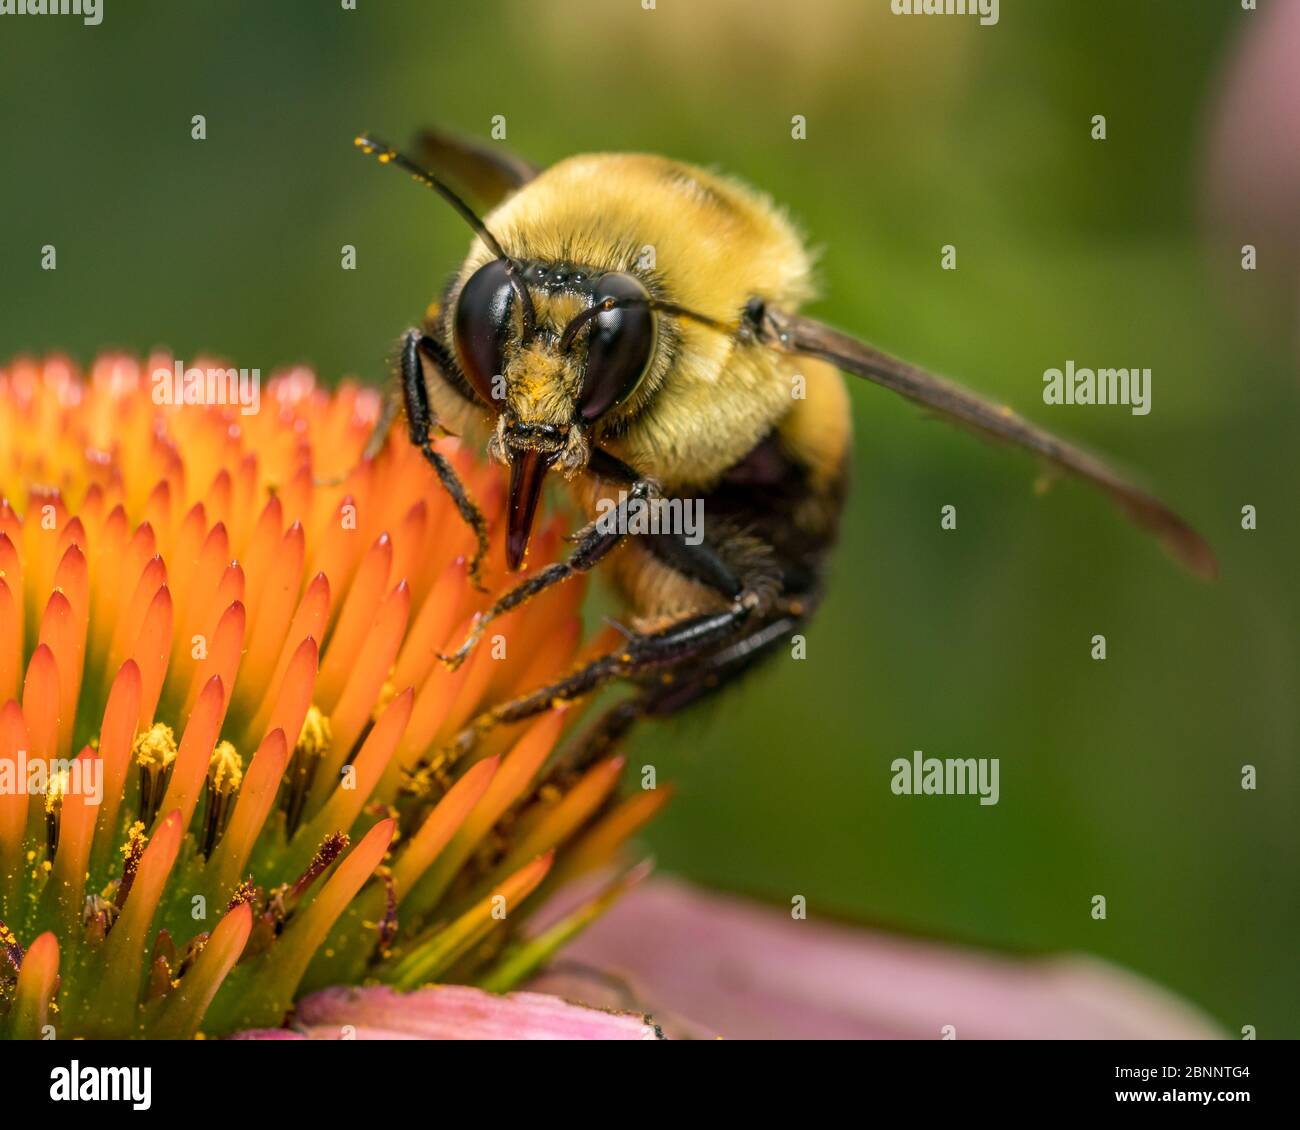 Common eastern bumble bee eating nectar and pollen from coneflower plant. Concept of pollinater and nature conservation, backyard flower garden Stock Photo